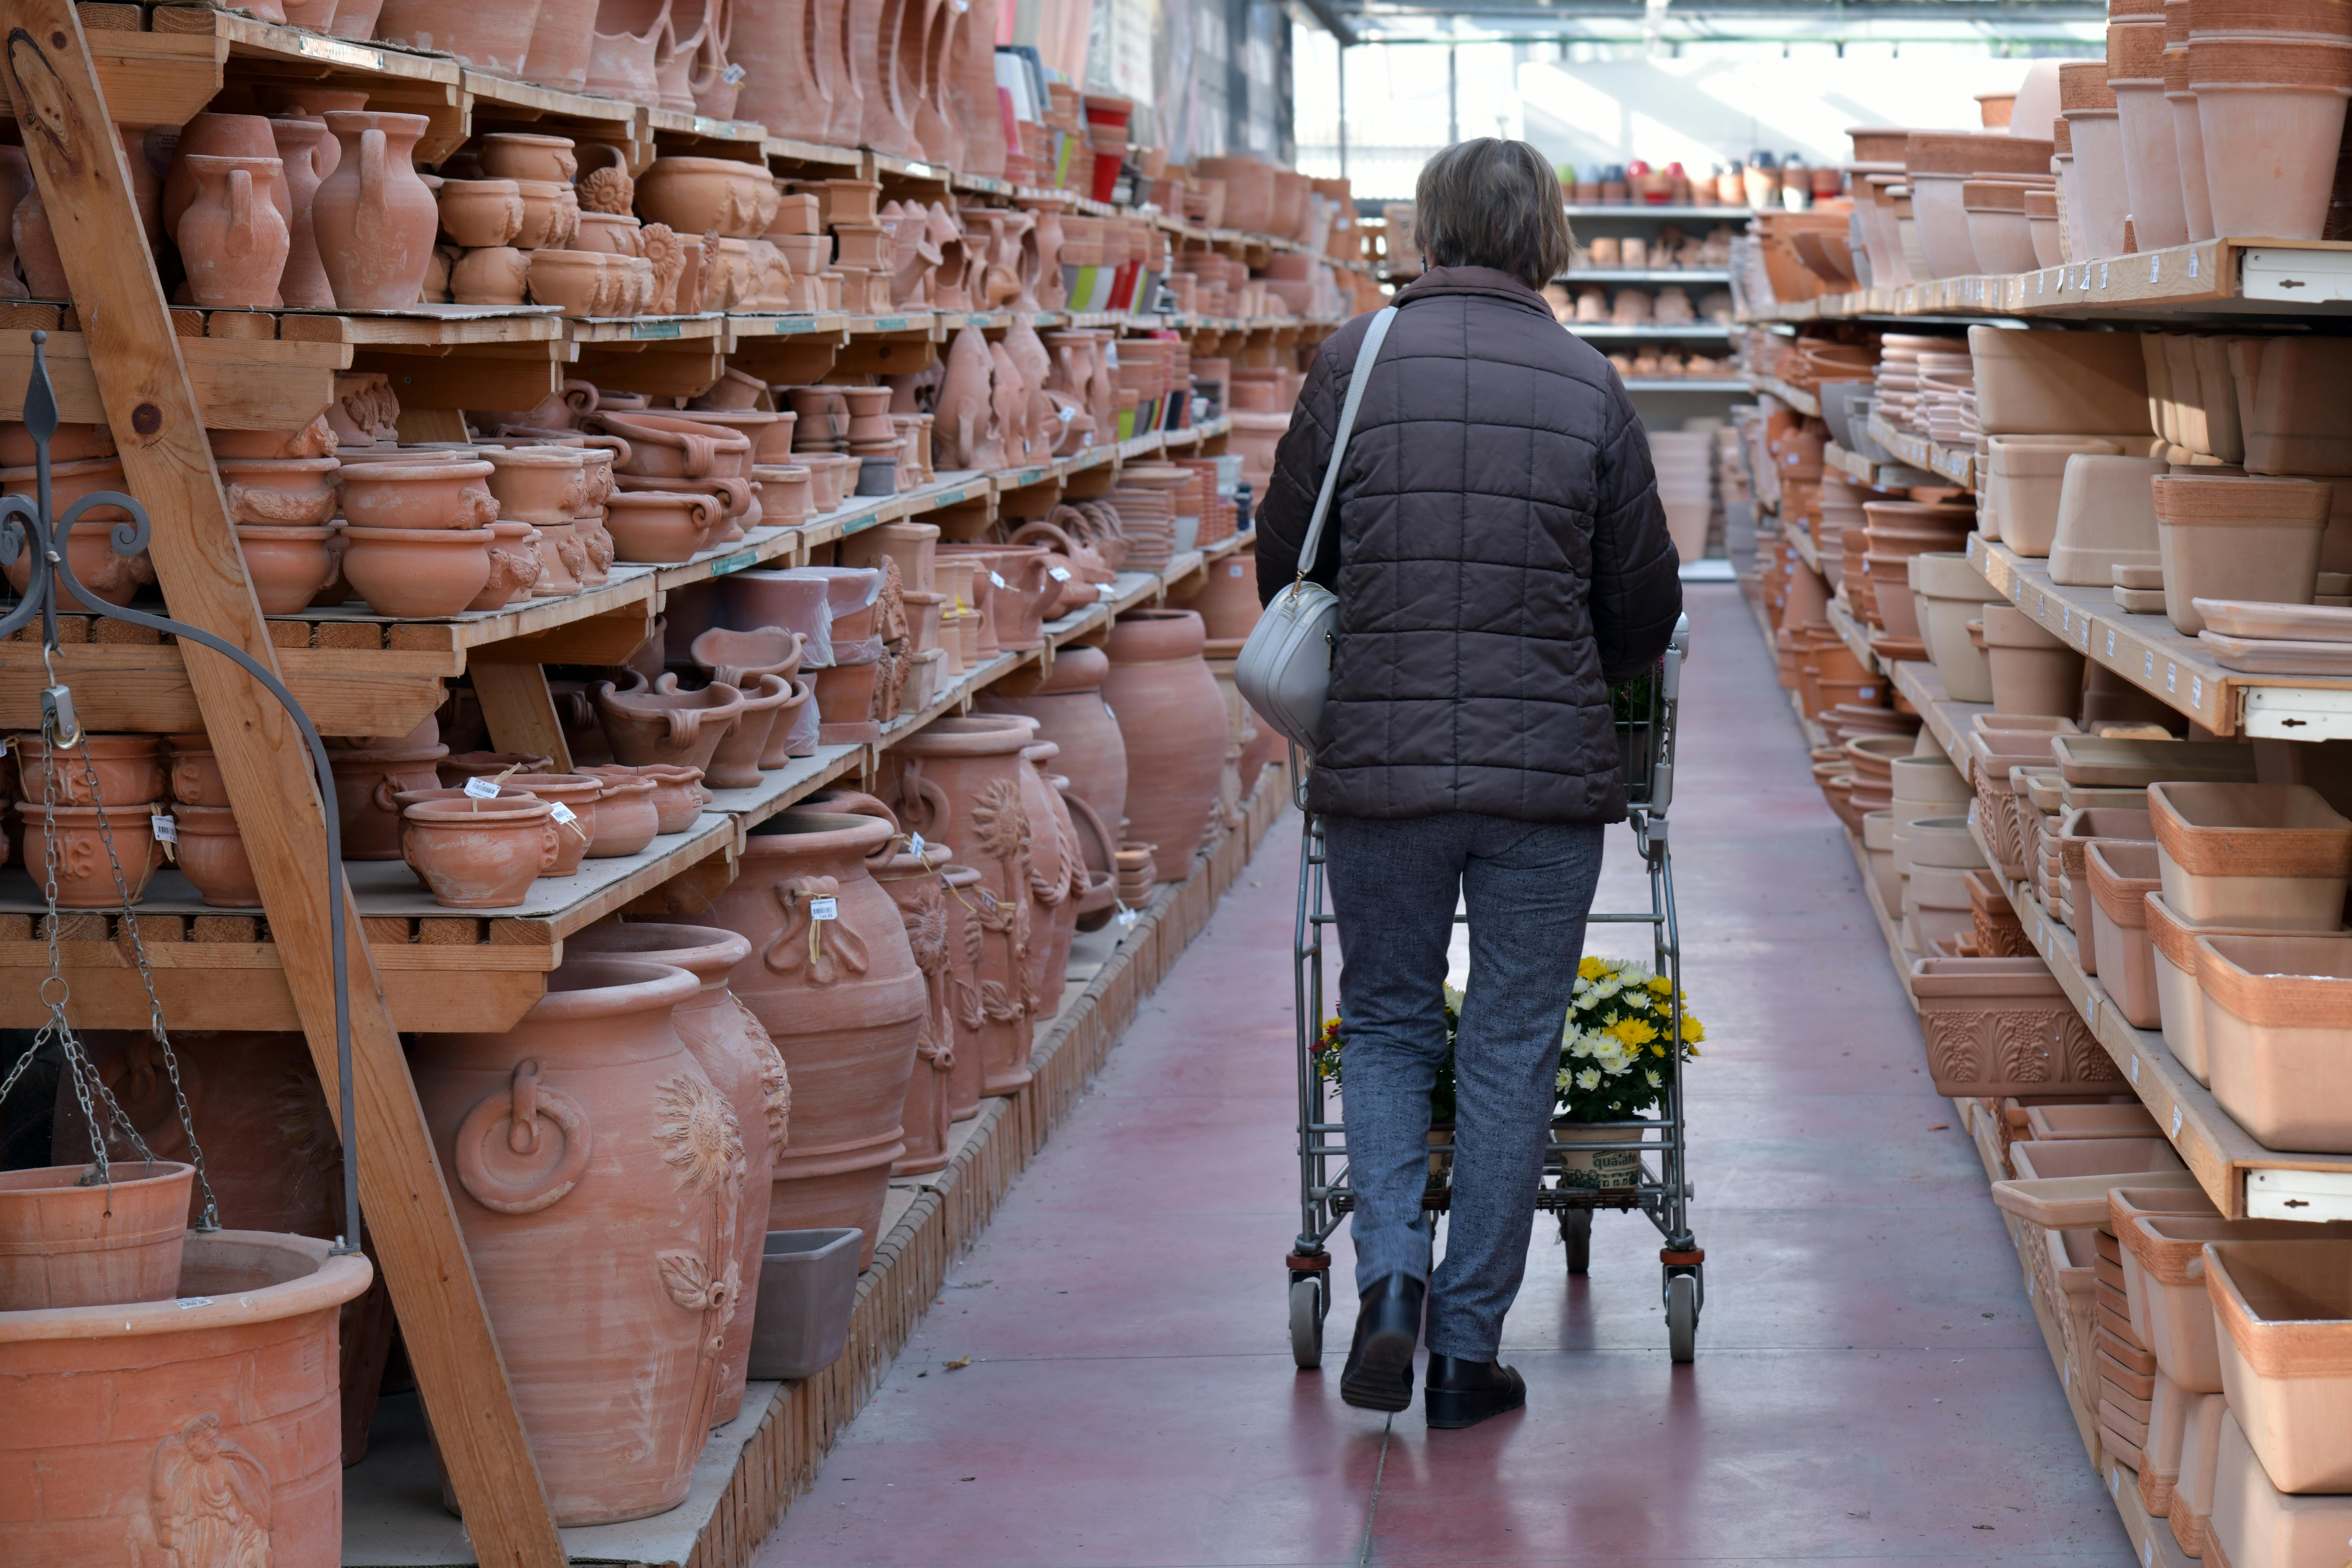 back view of a woman looking at ceramic products in a store